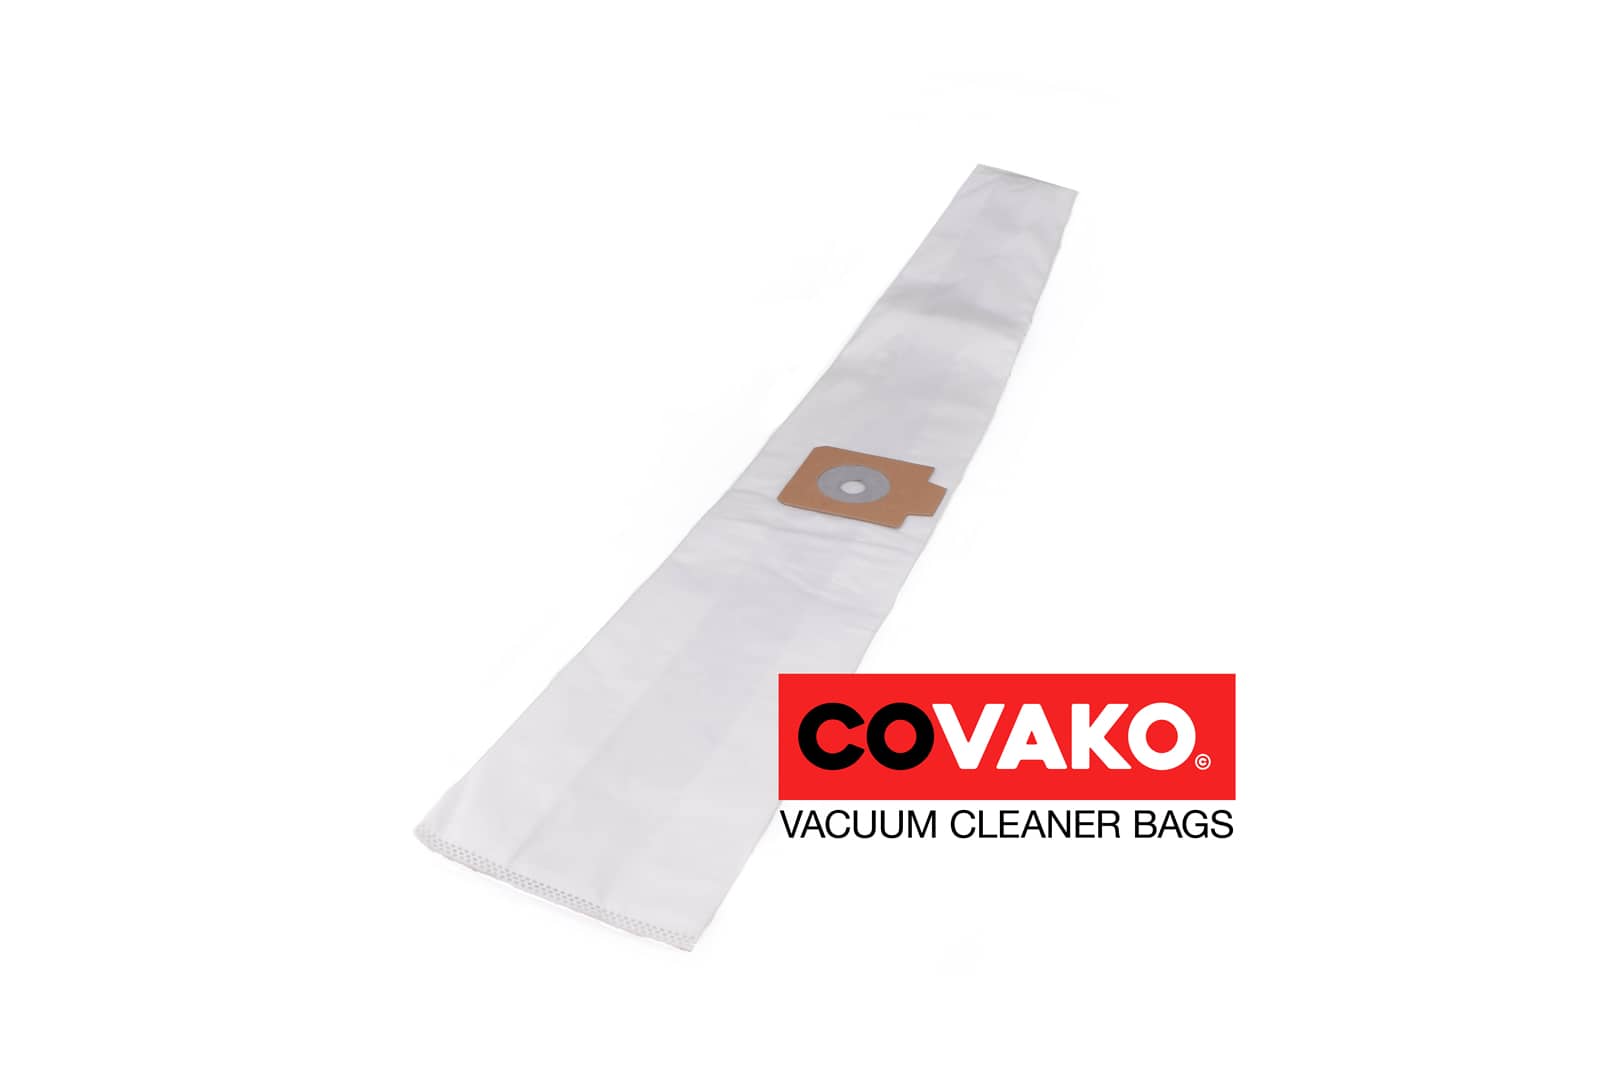 Lux DP 9000 / Synthesis - Lux vacuum cleaner bags